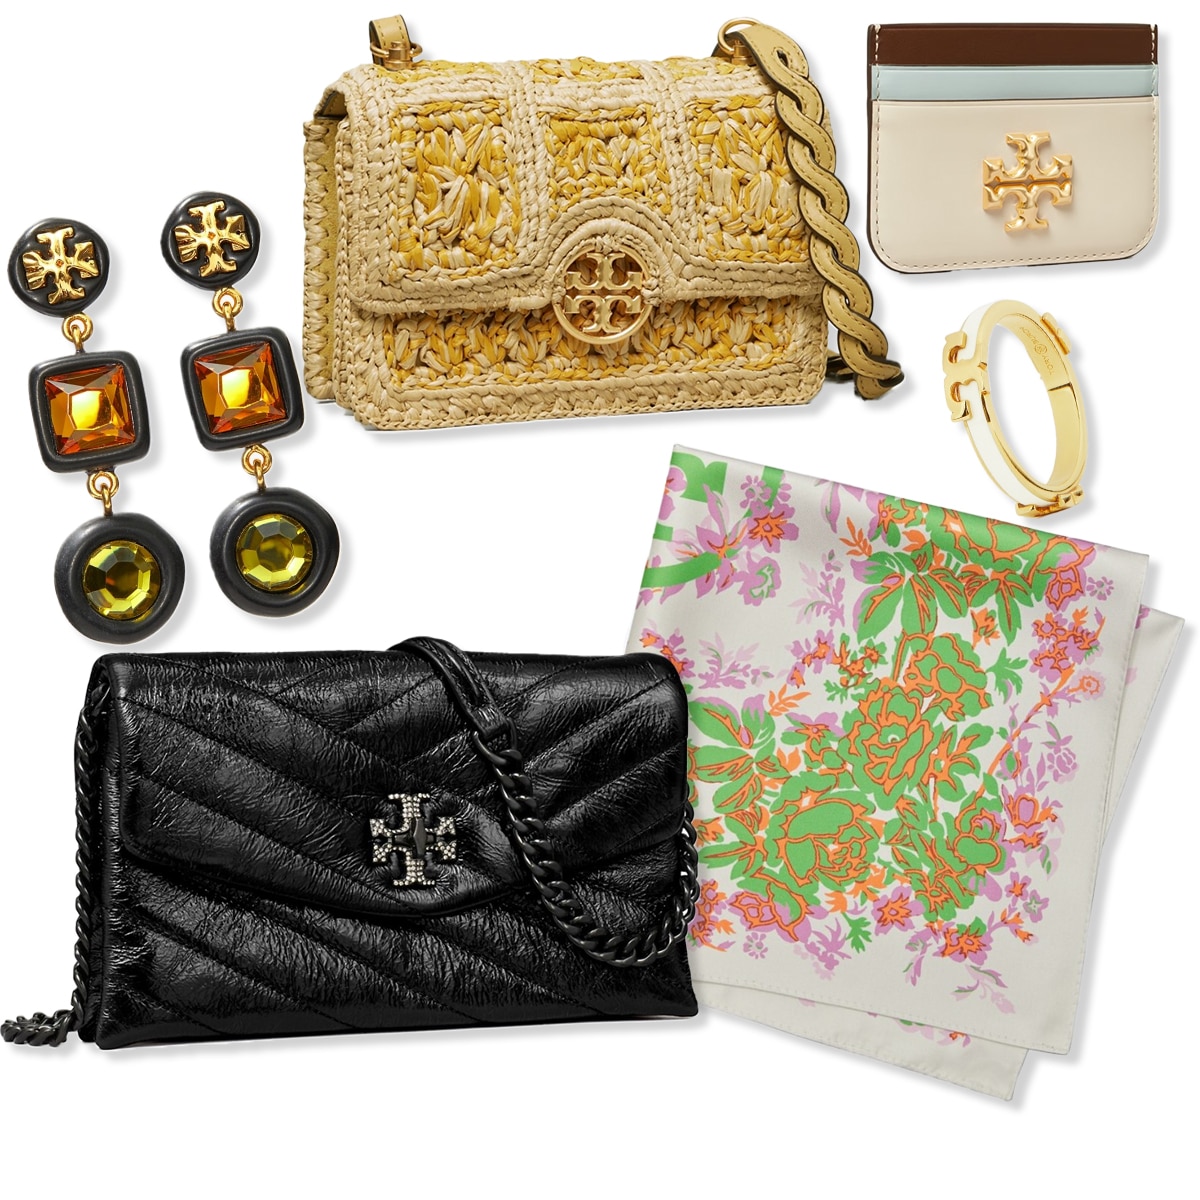 Tory Burch Has the Cutest New Sale Styles for Hundreds of Dollars Off